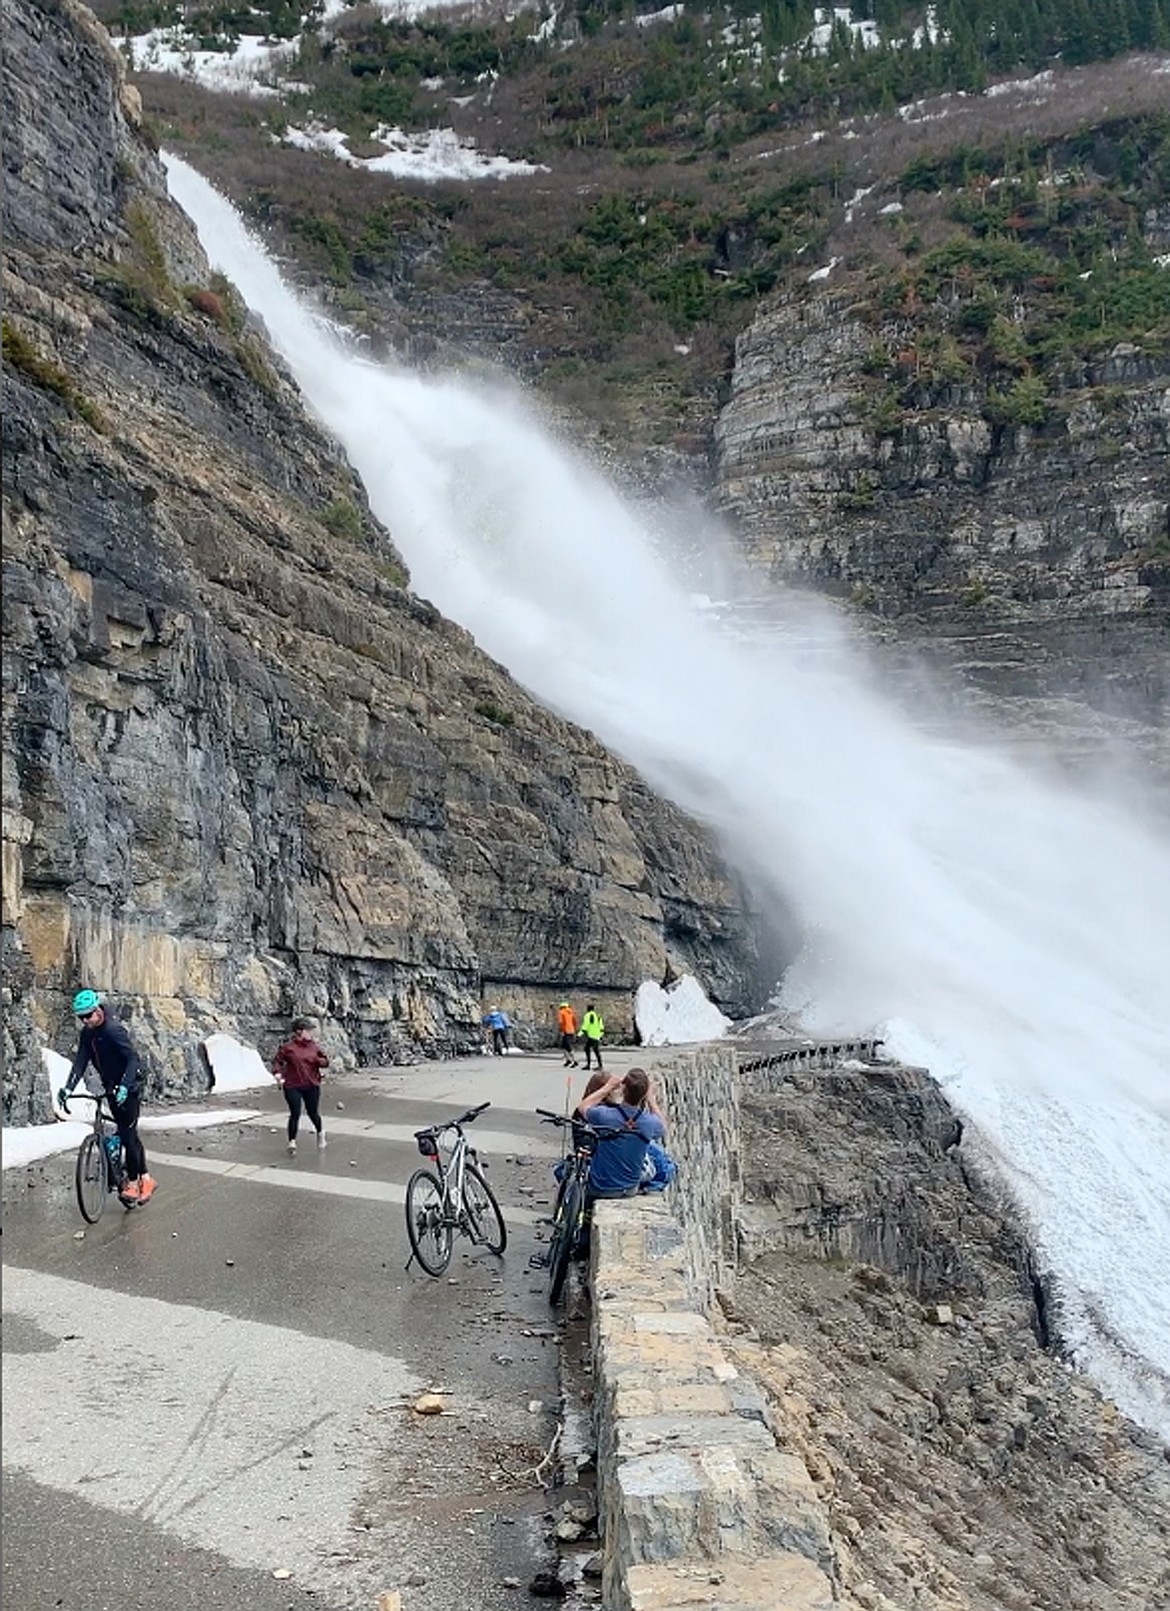 People watch an avalanche cross Going-to-the-Sun Road in Glacier National Park in 2019. The slide stranded 13 cyclists for about eight hours. (Photo provided/GNP)